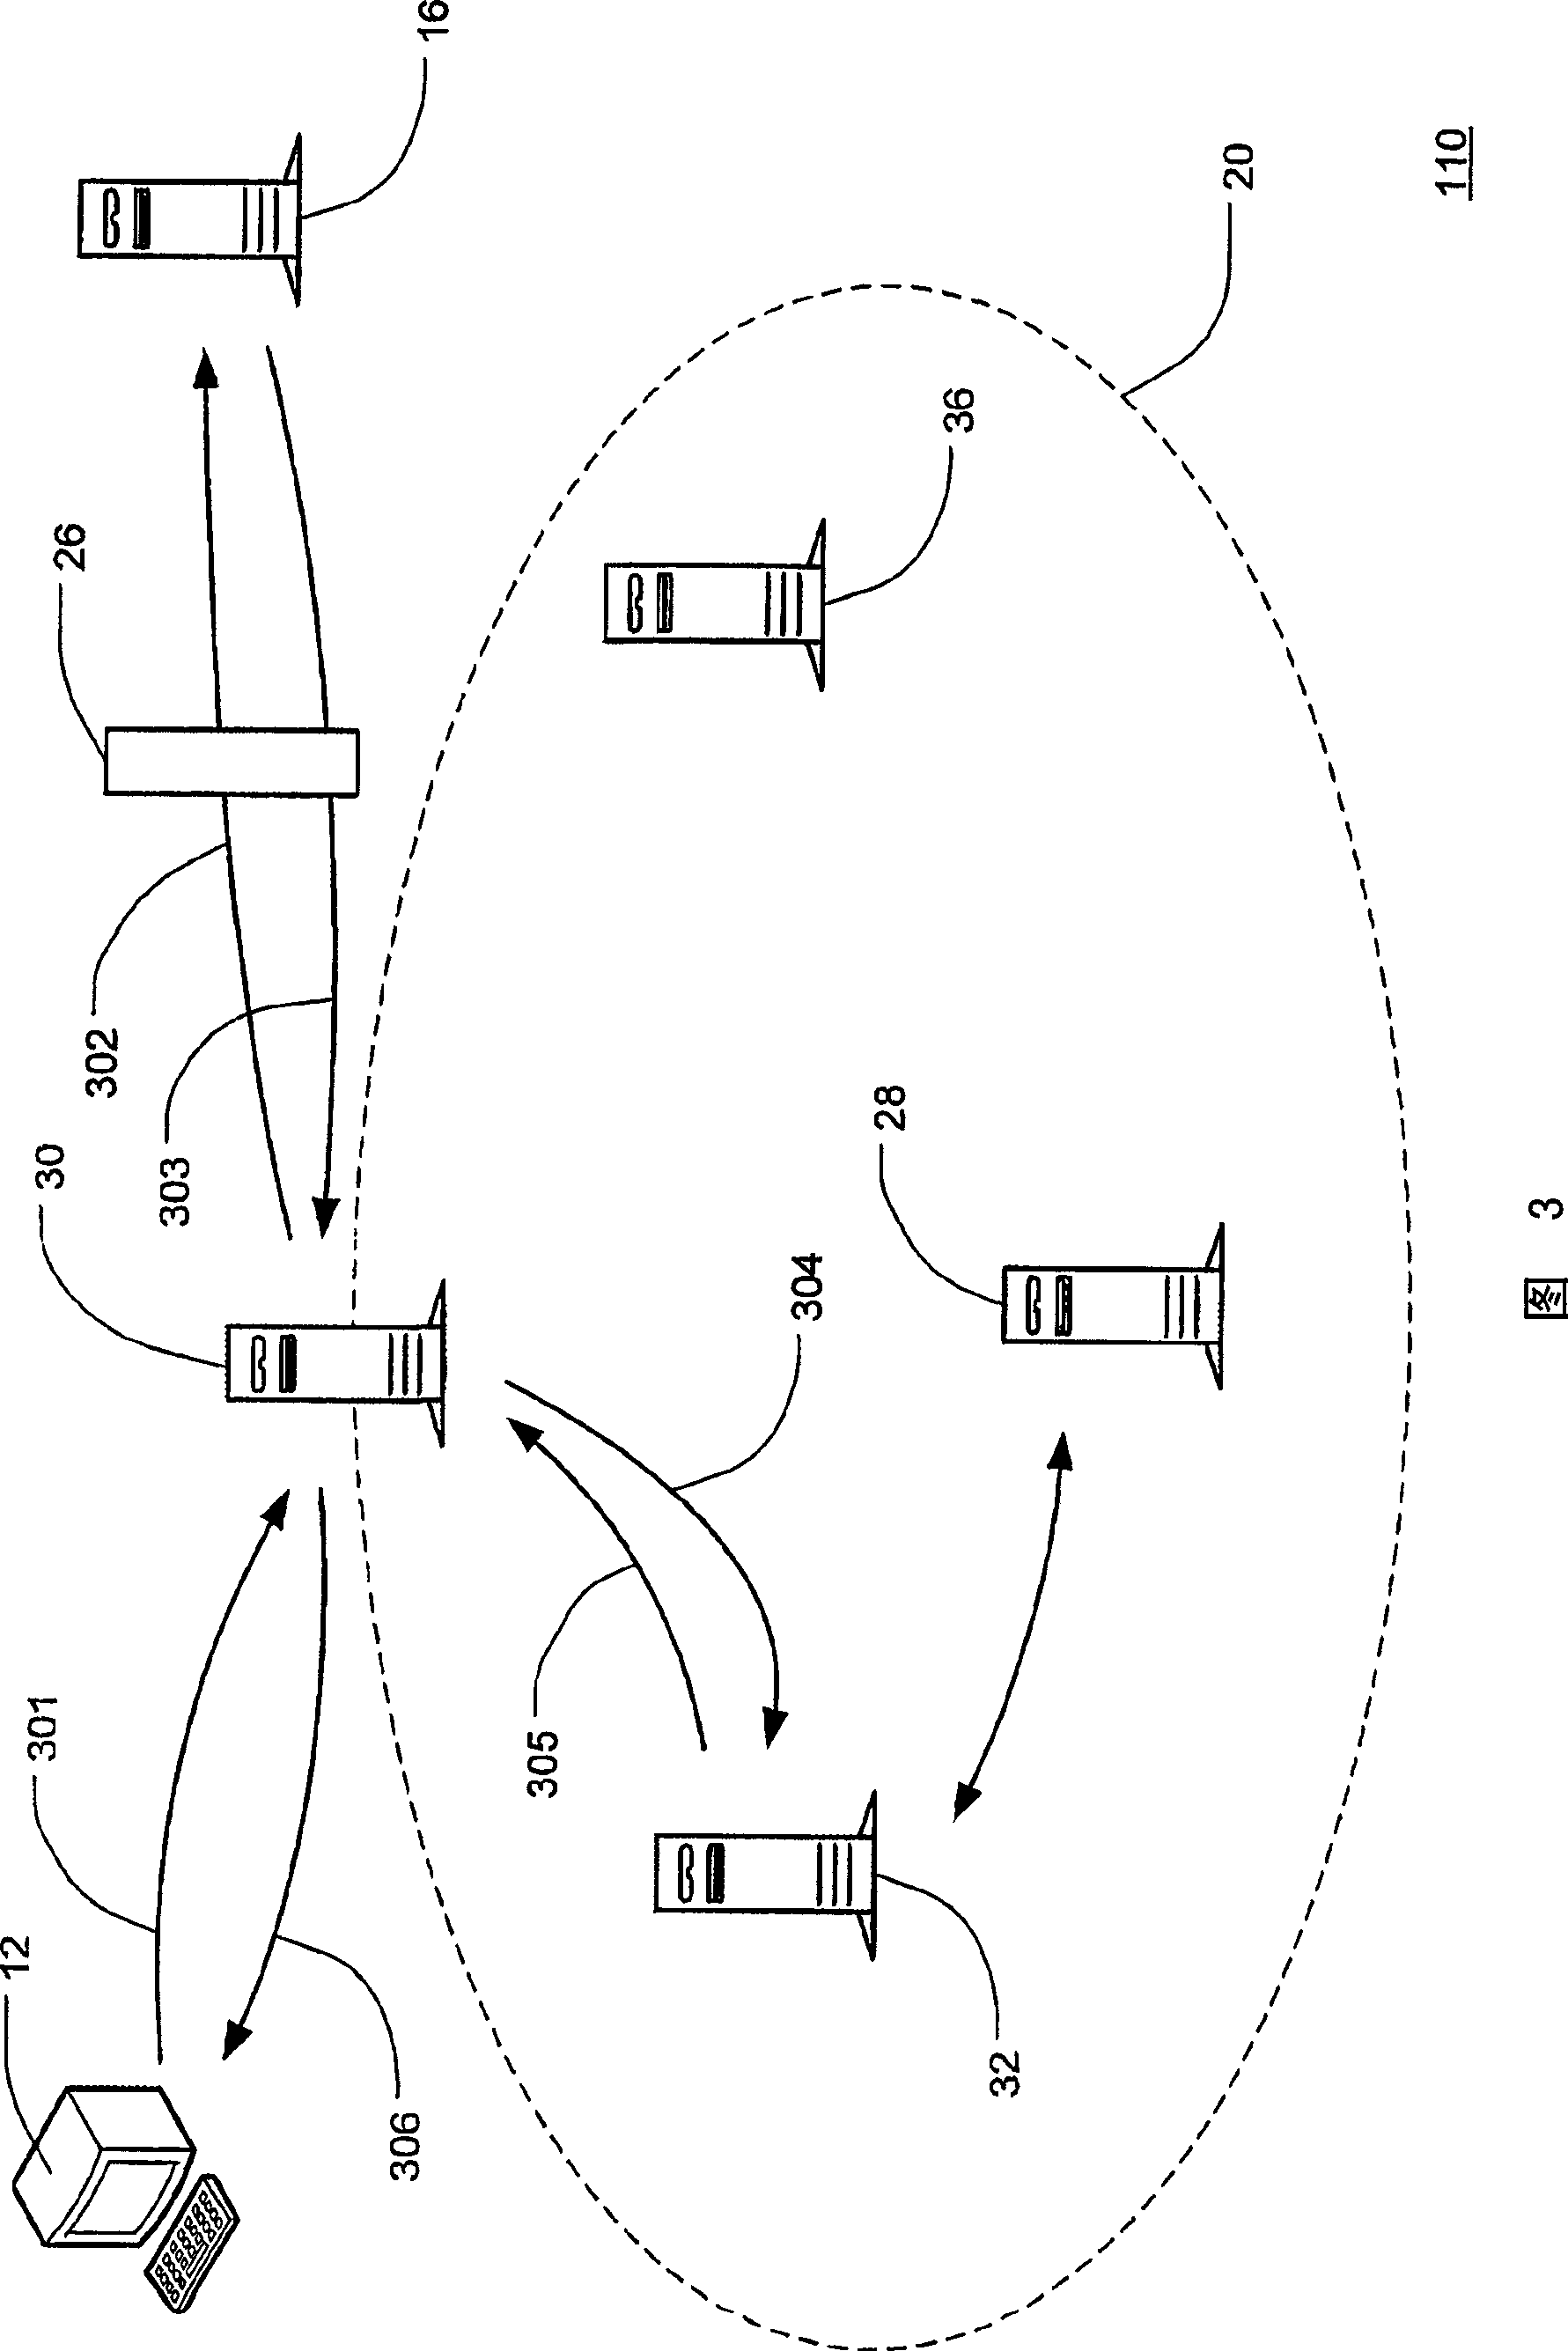 Authentication system for networked computer applications